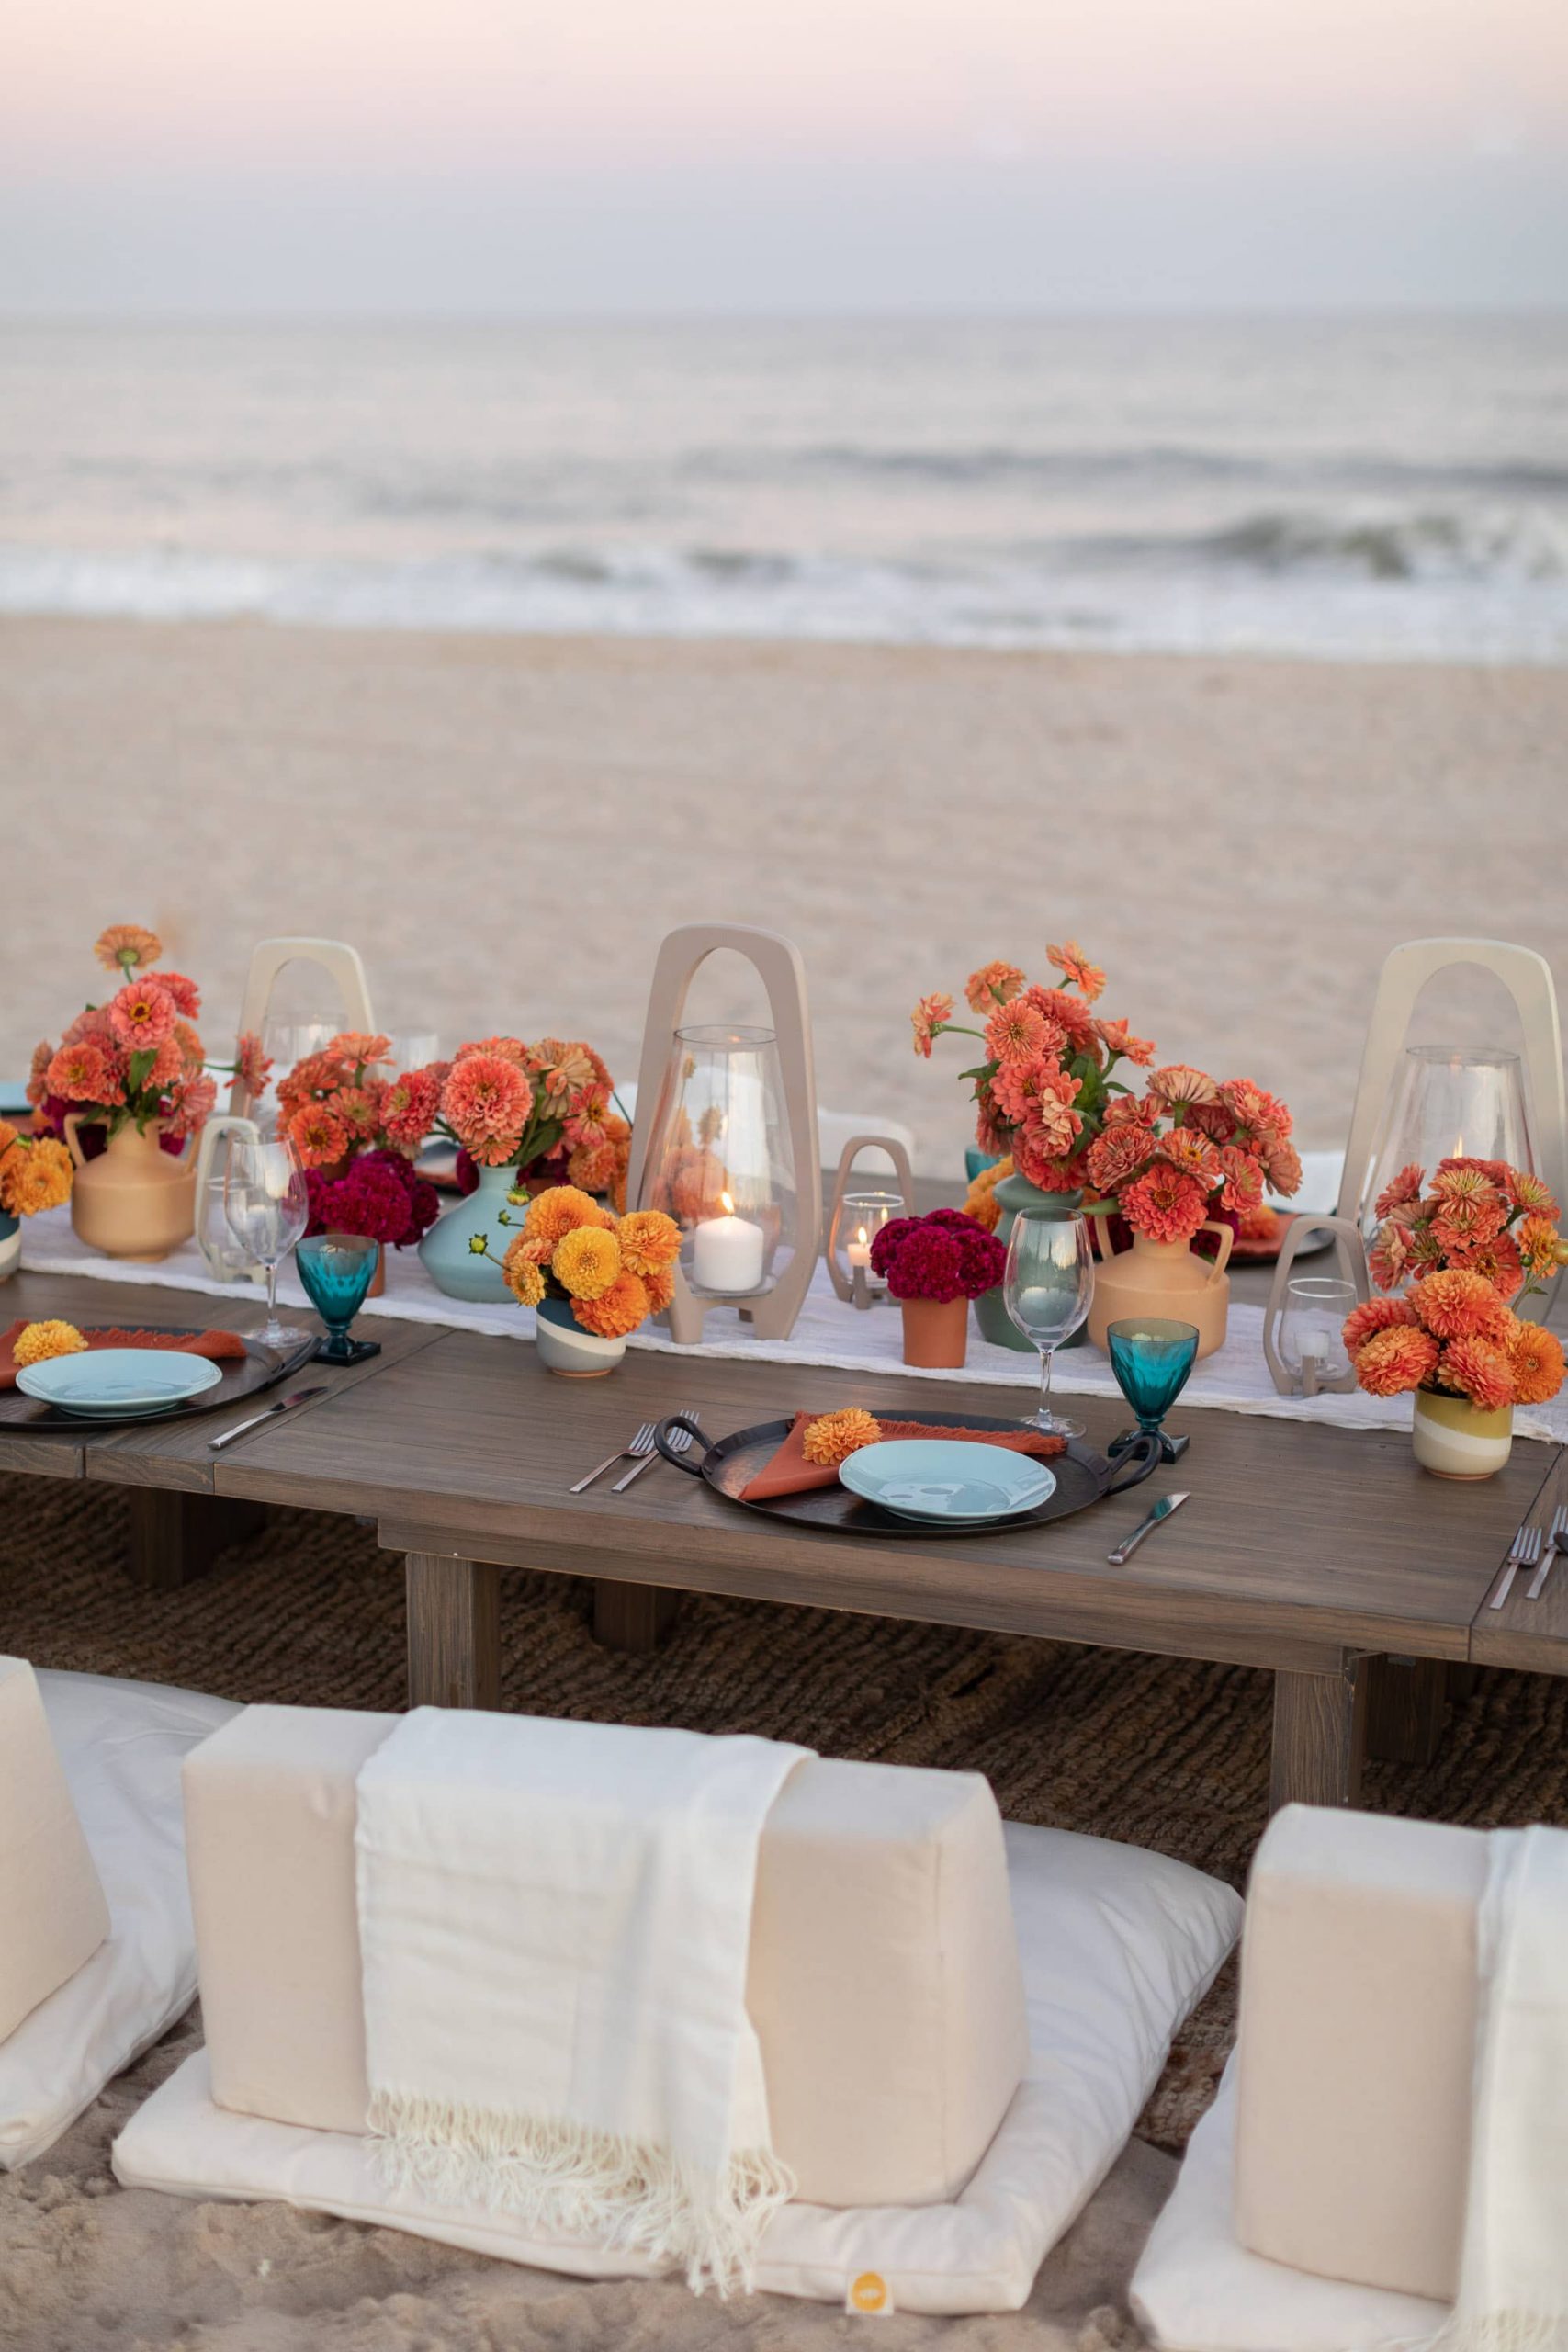 Table decor with orange flower decor at 40th birthday dinner on the beach in Southampton | Photo by Luis Zepeda